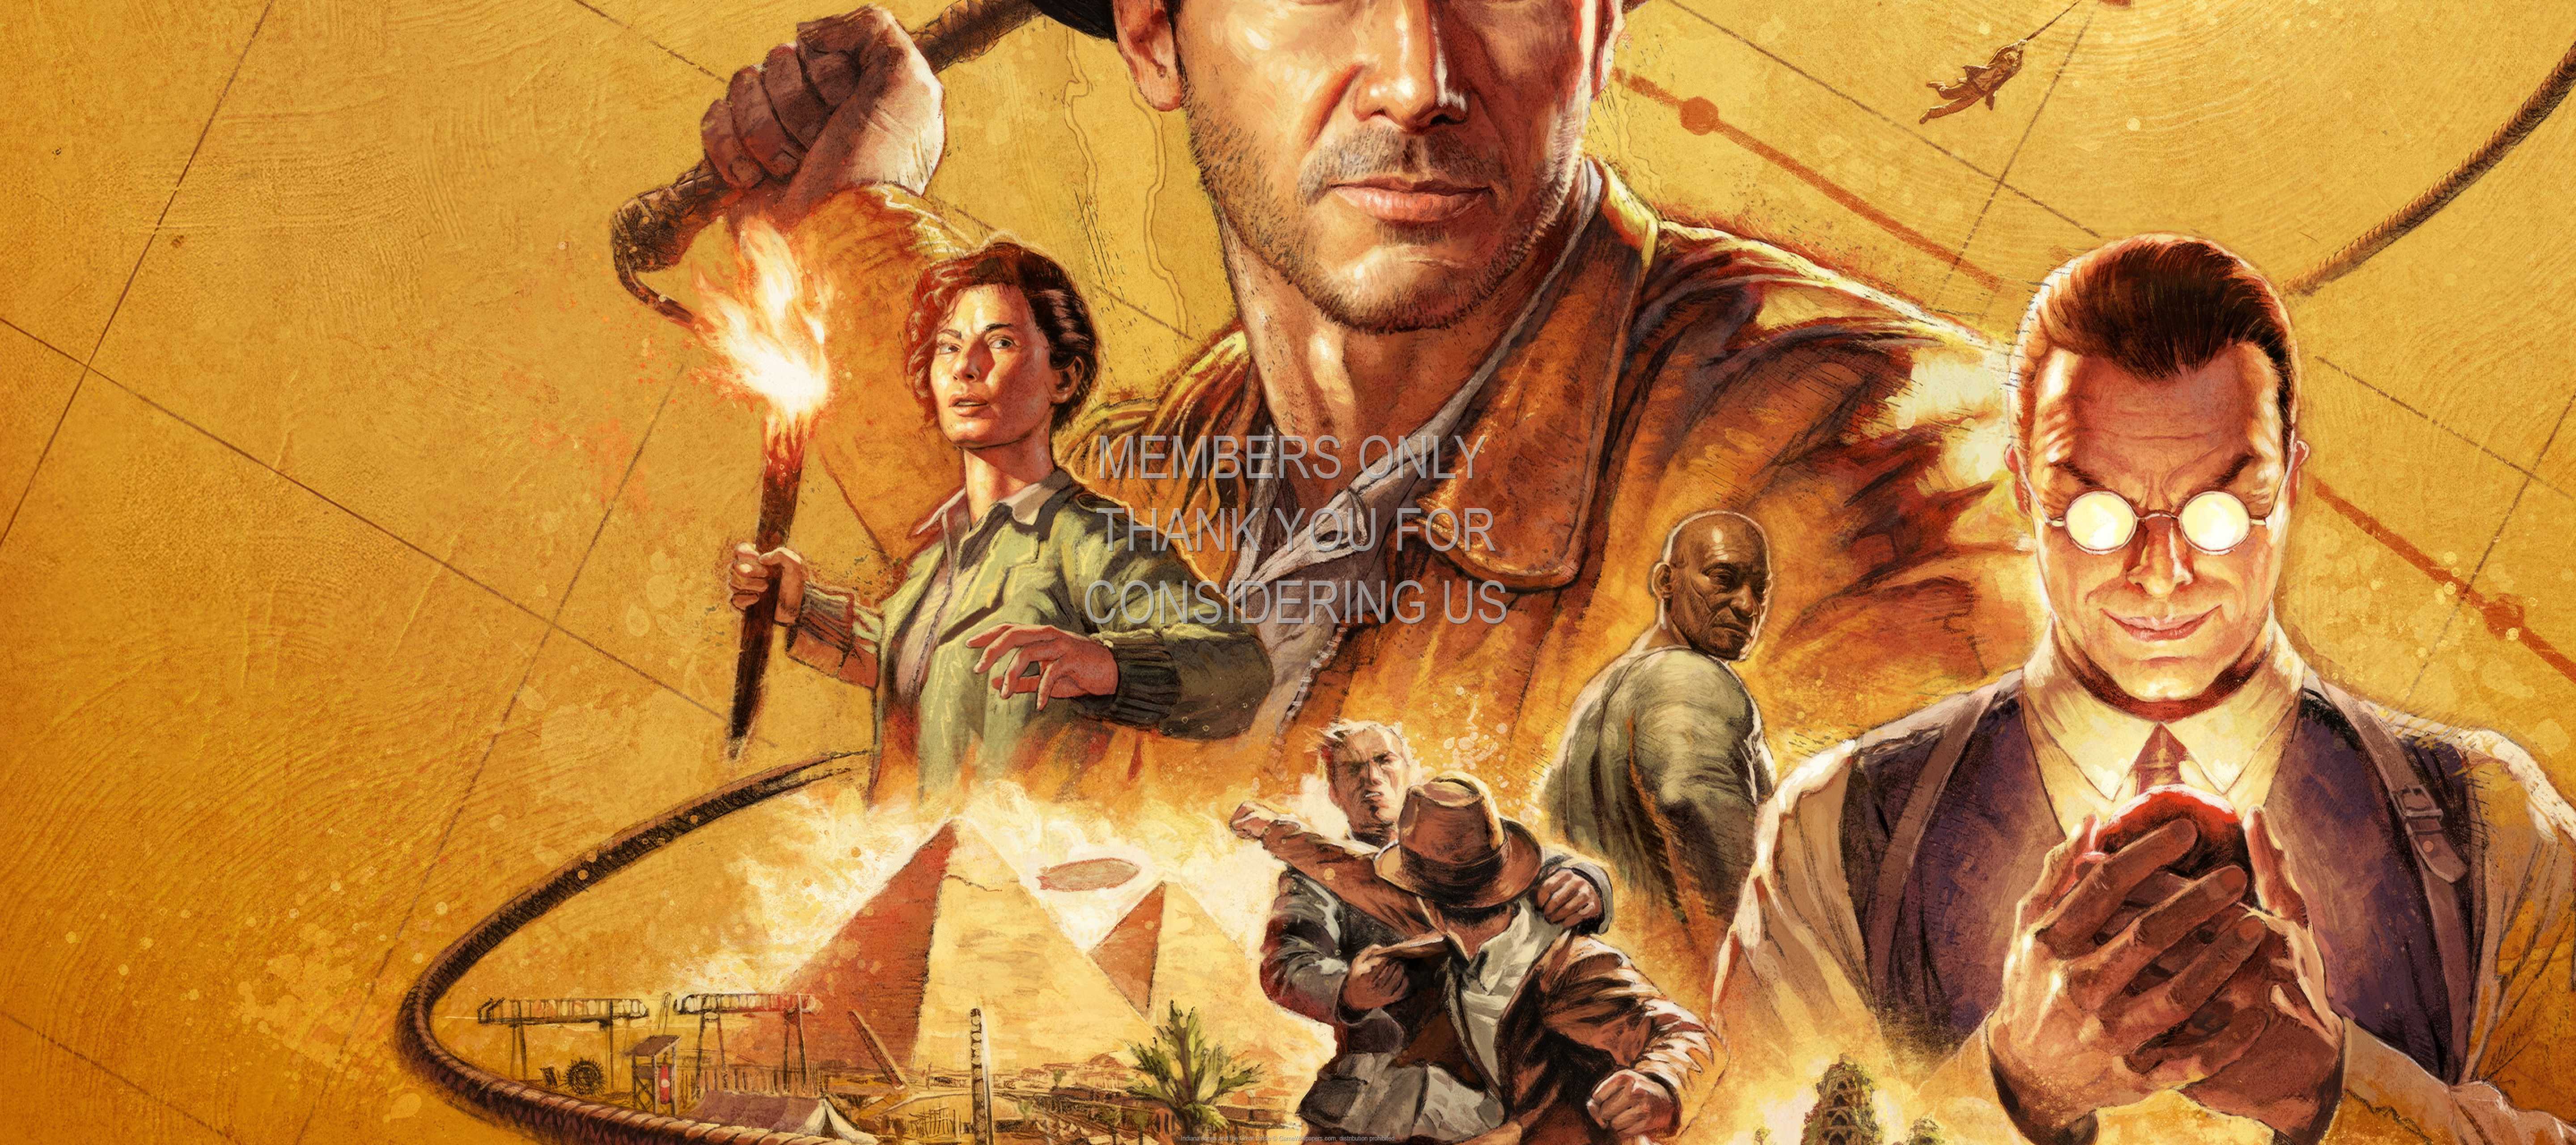 Indiana Jones and the Great Circle 1440p%20Horizontal Mobile wallpaper or background 01